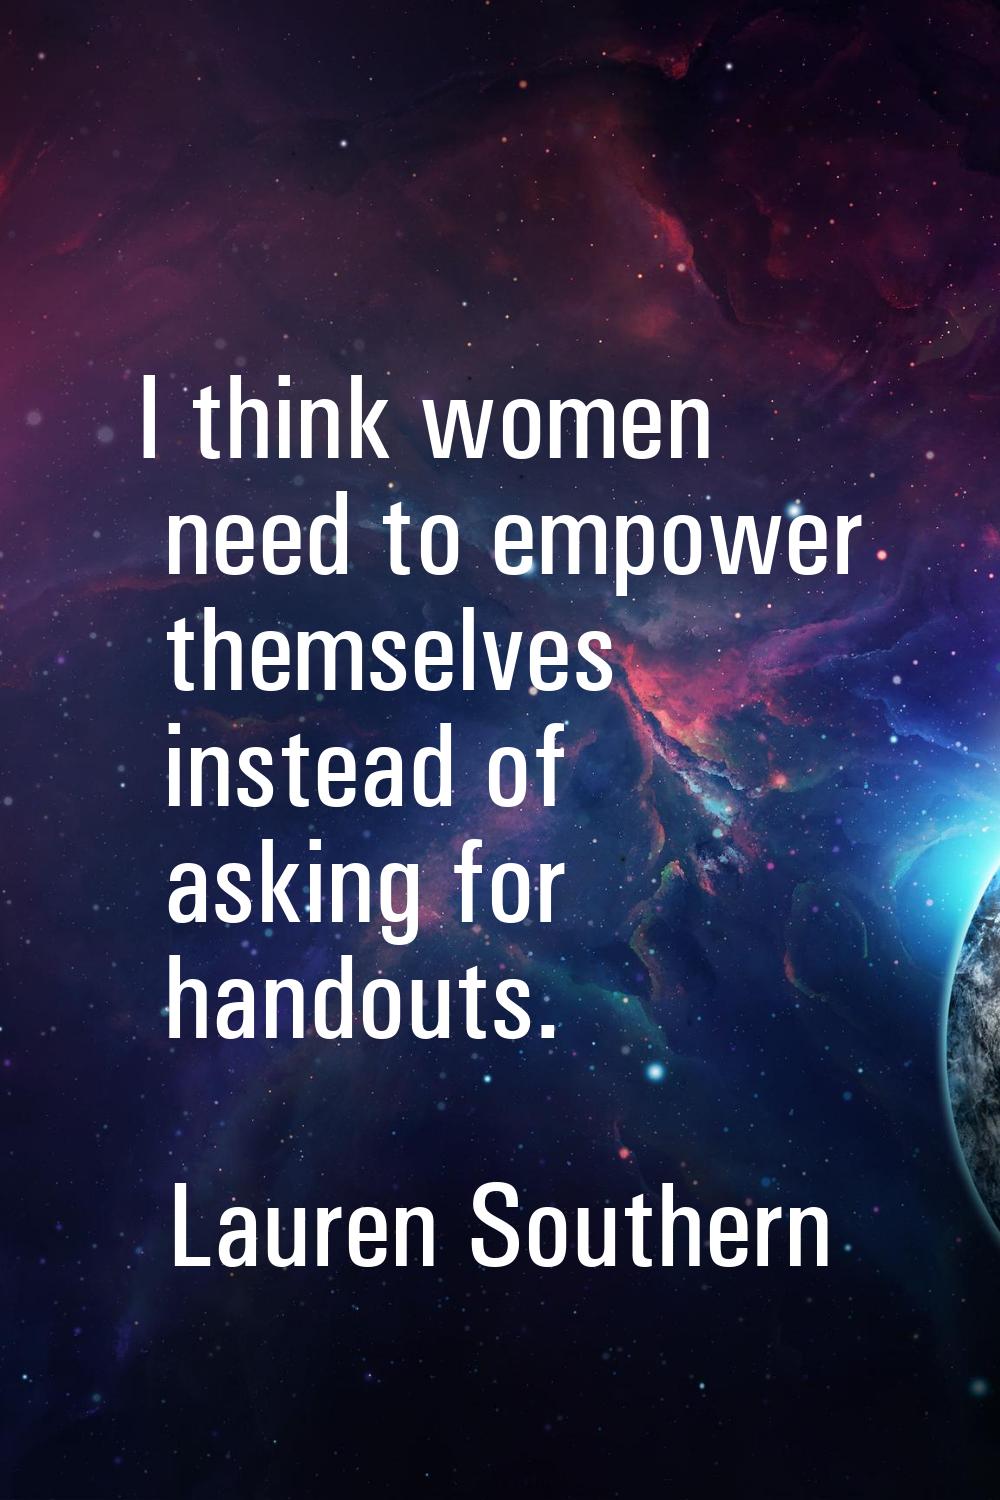 I think women need to empower themselves instead of asking for handouts.